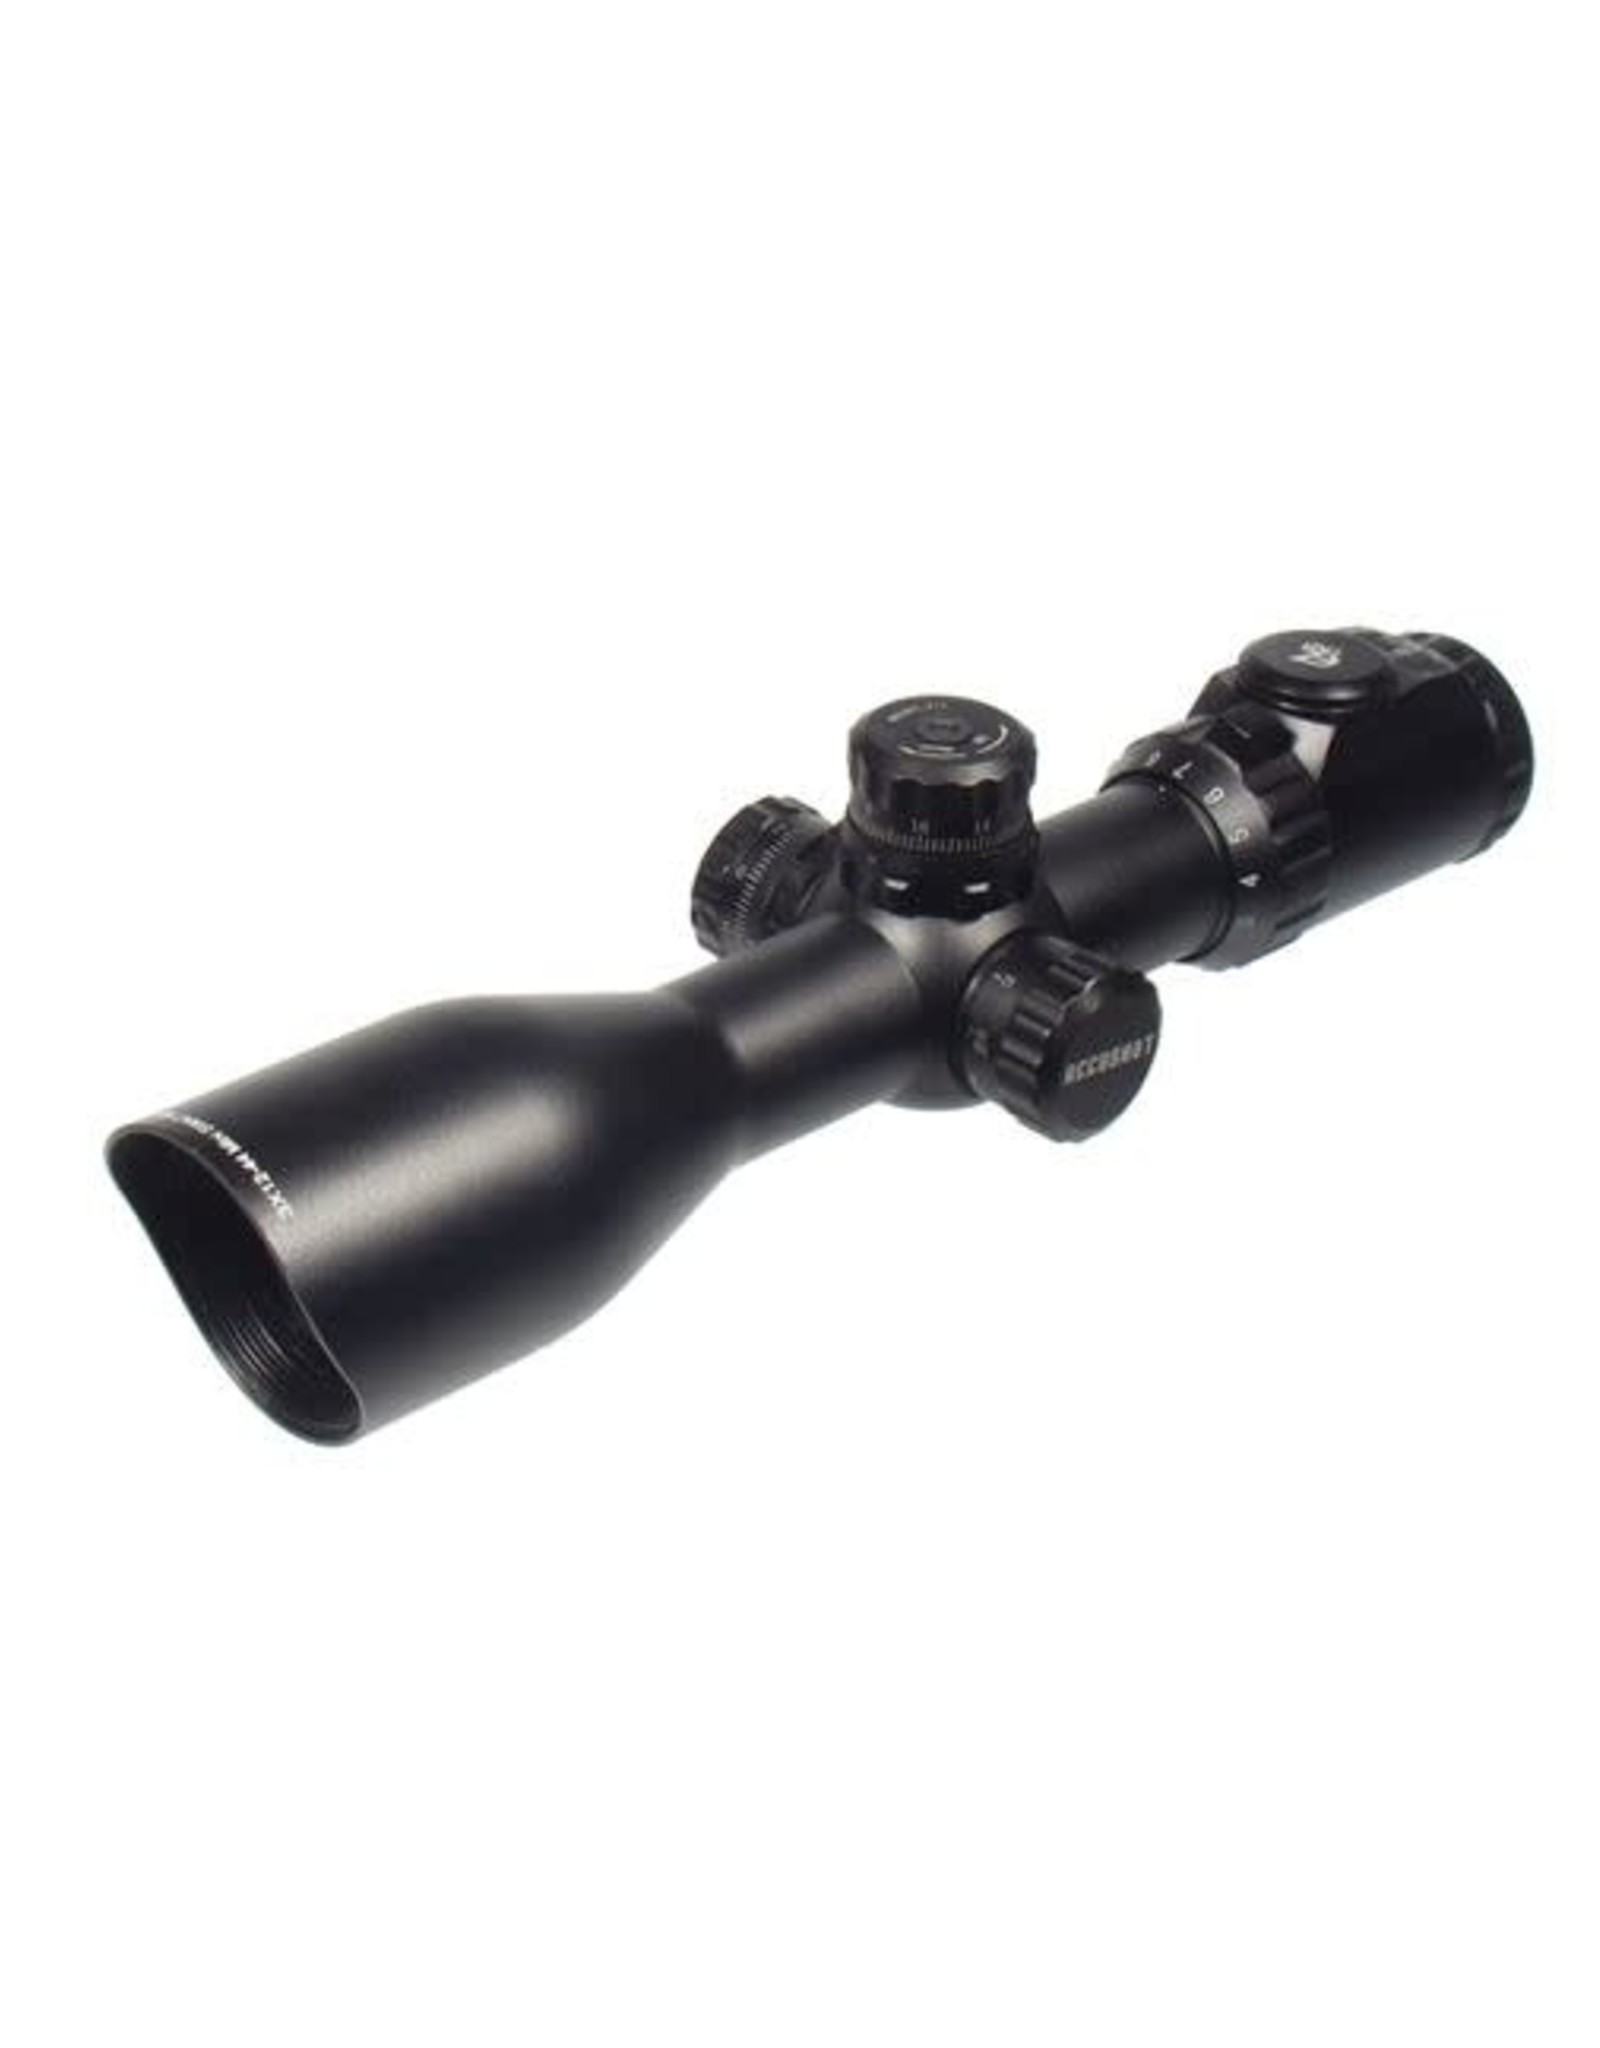 UTG - Leapers Accushot Compact Scope with Medium Profile Picatinny Rings by UTG 3-12x44 1/4 MOA AO 30mm Tube